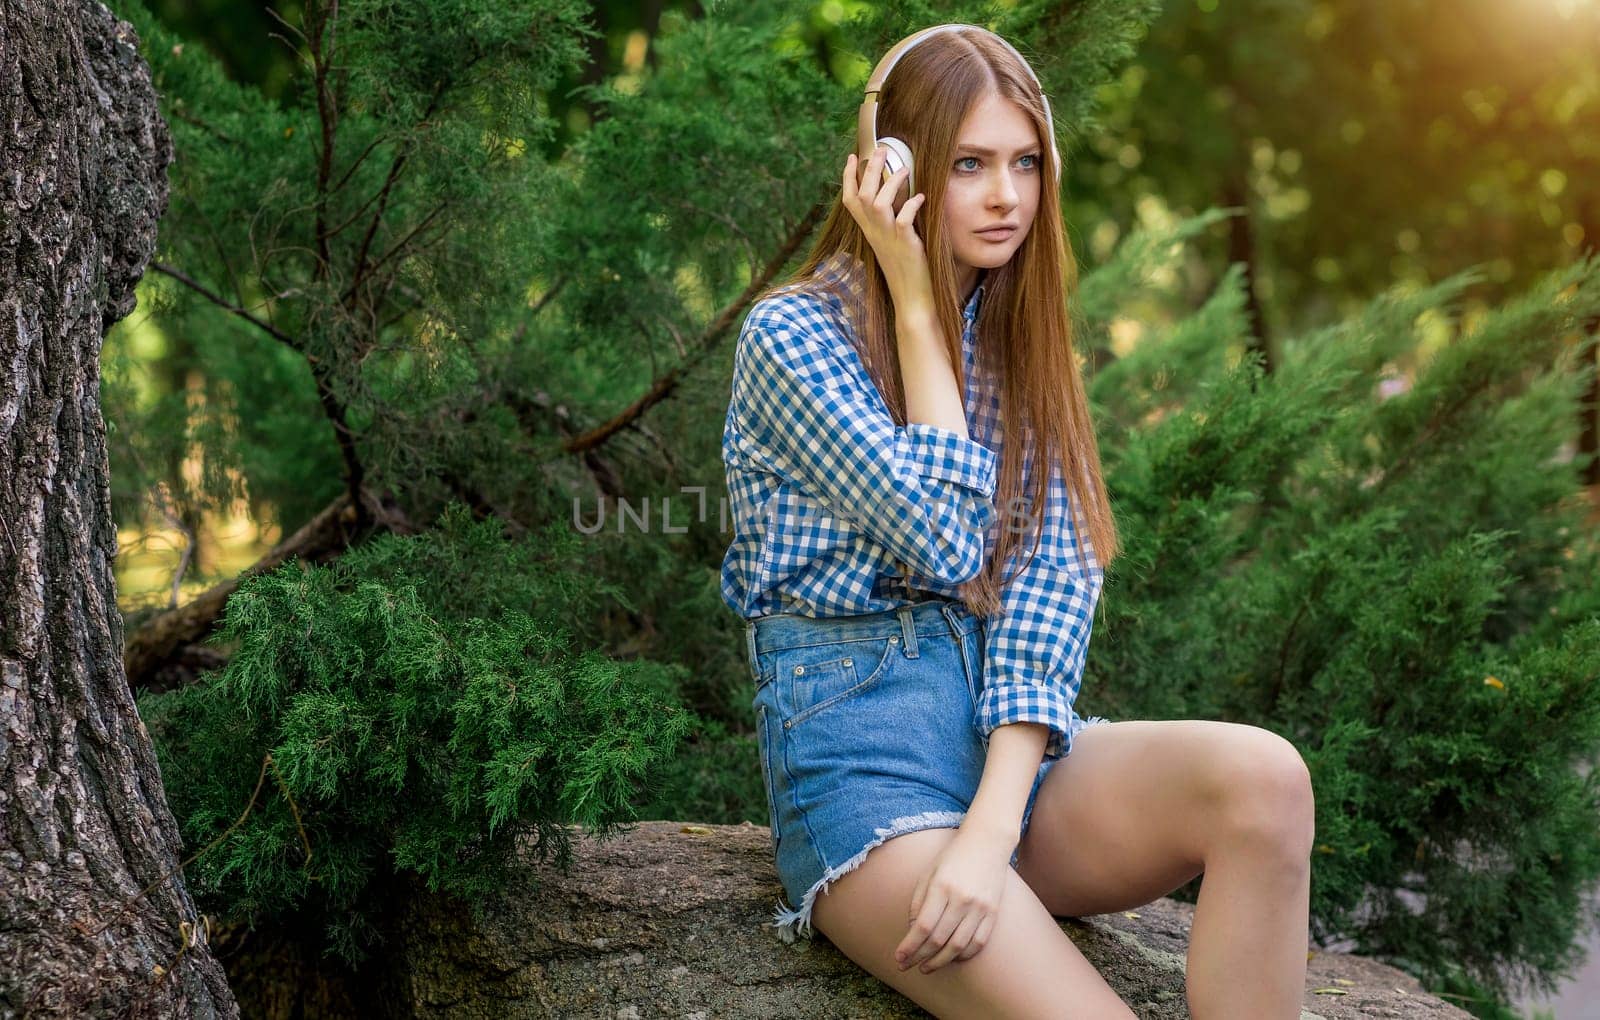 Young woman cute brunette girl sitting on stone headphones by nazarovsergey